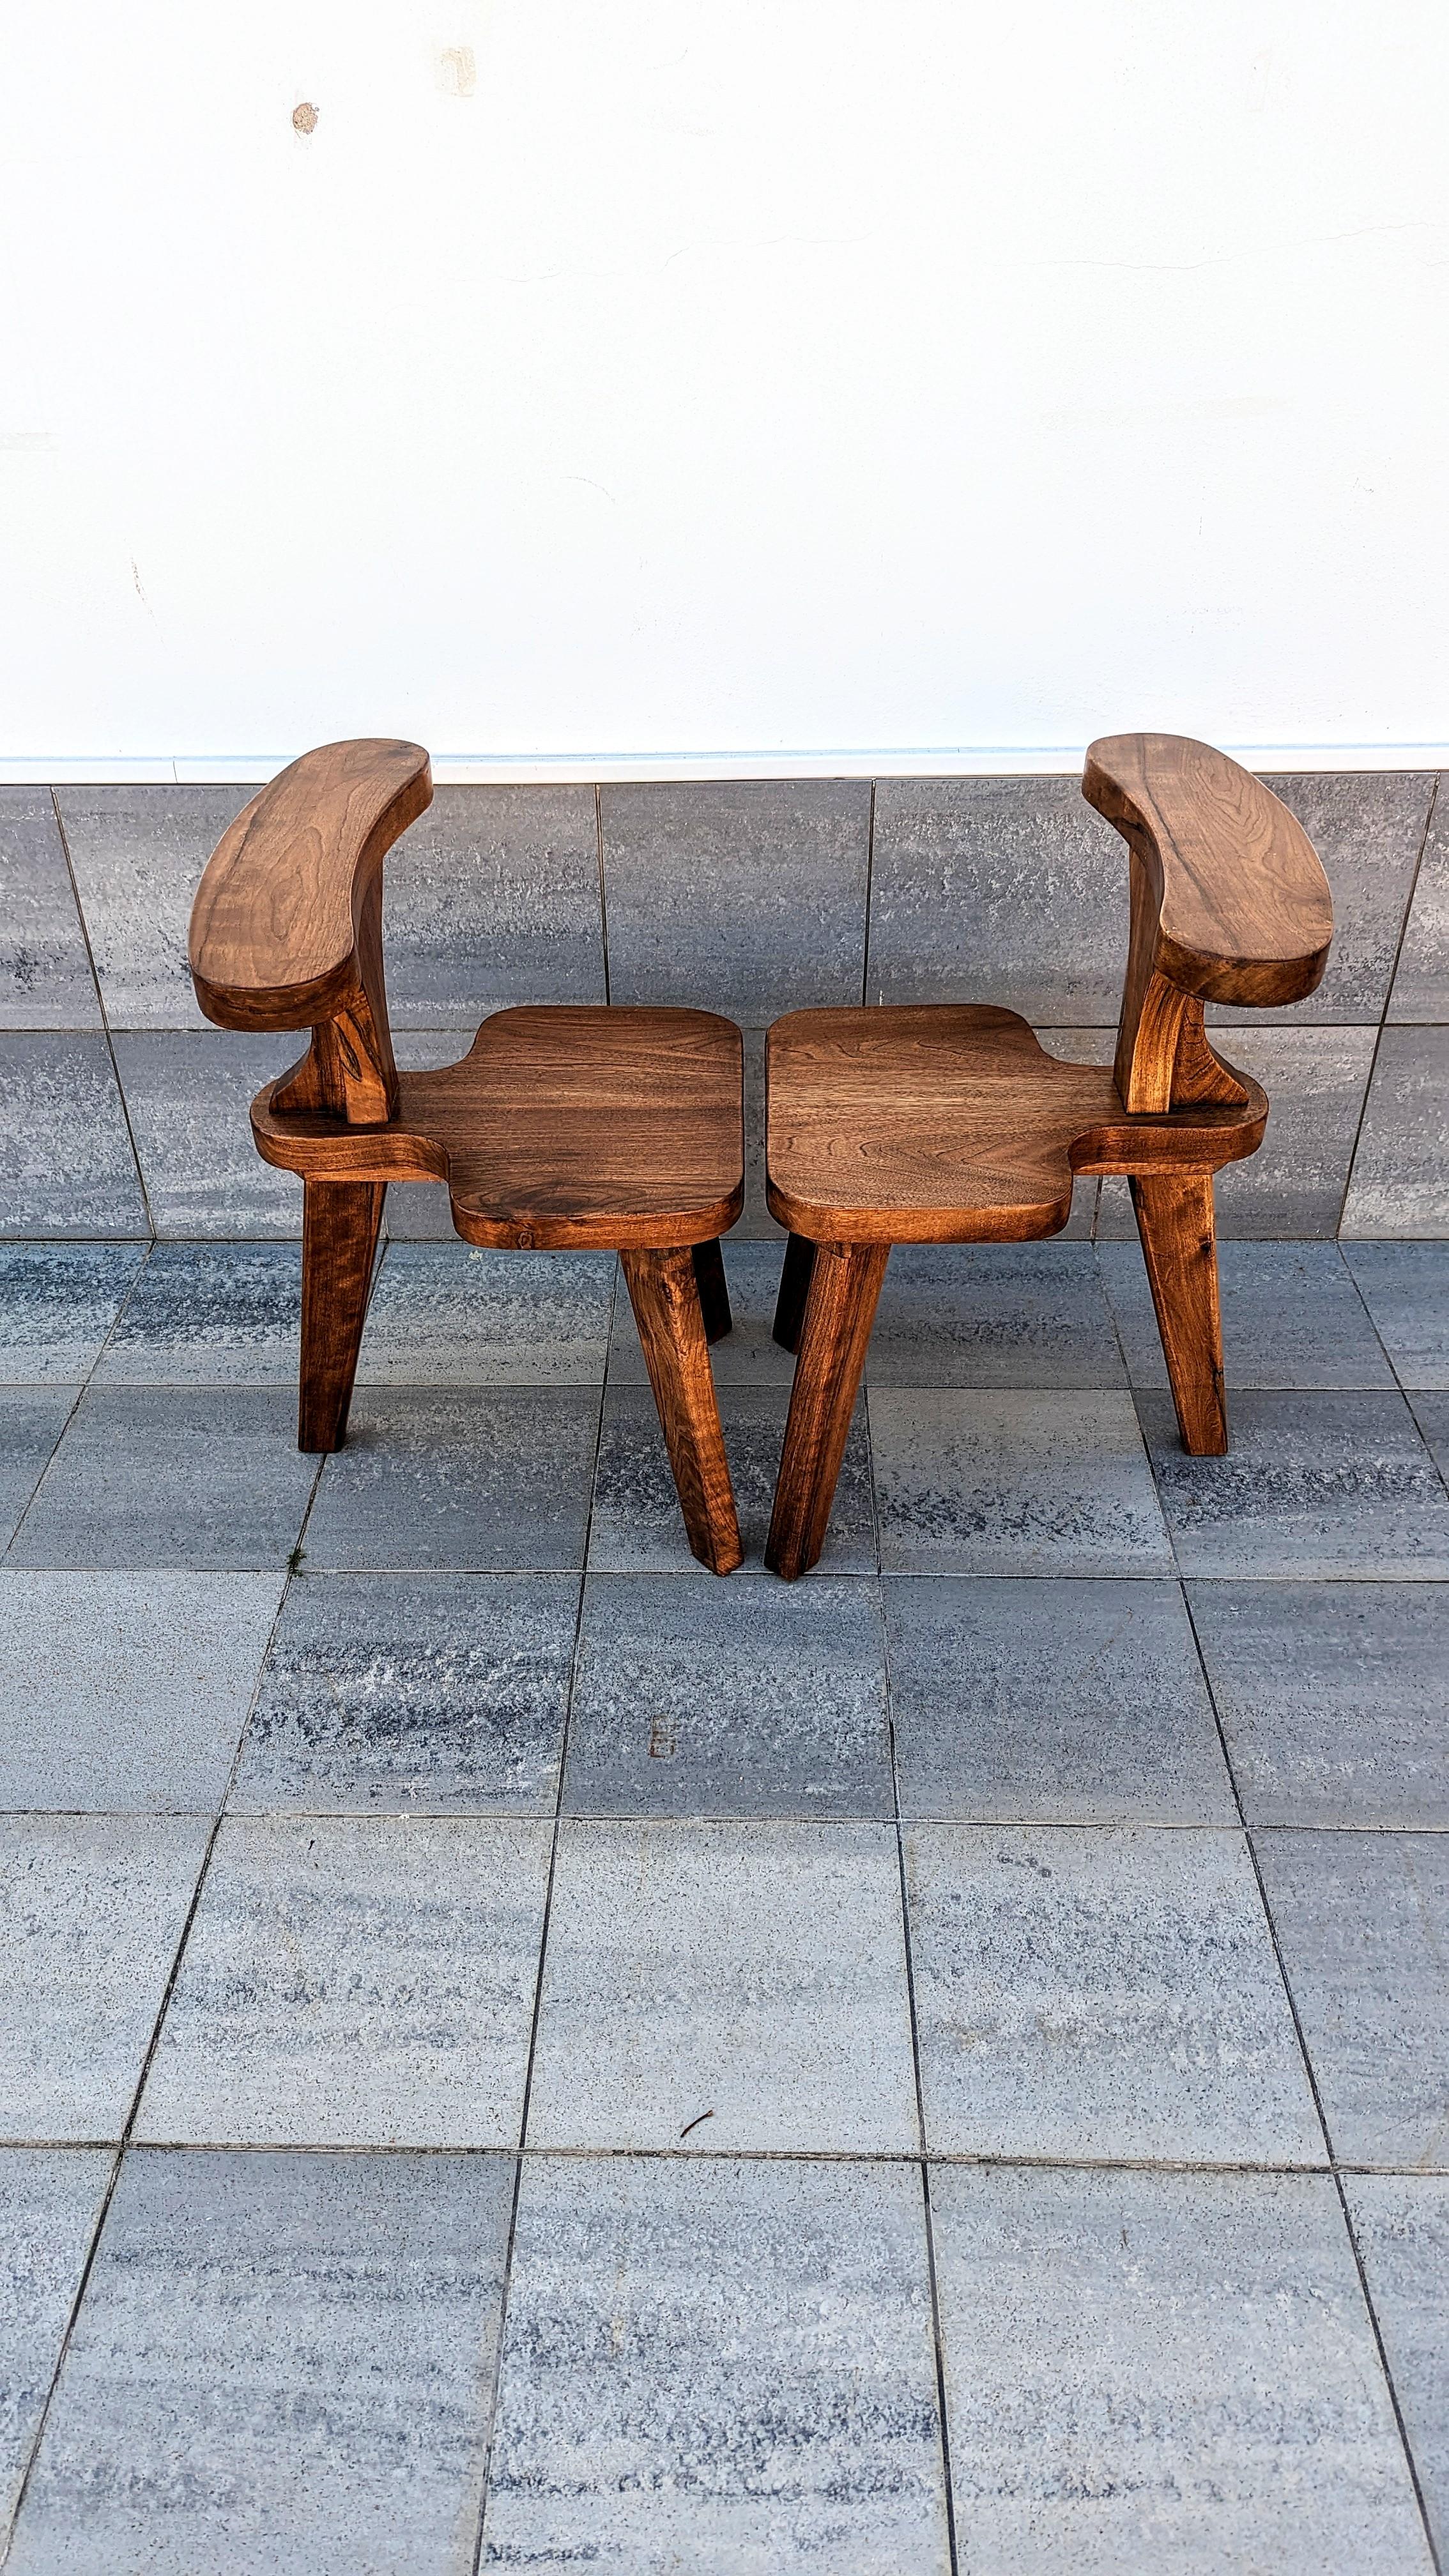 Persian Brutalist Oak Smoking Chairs, 1960s For Sale